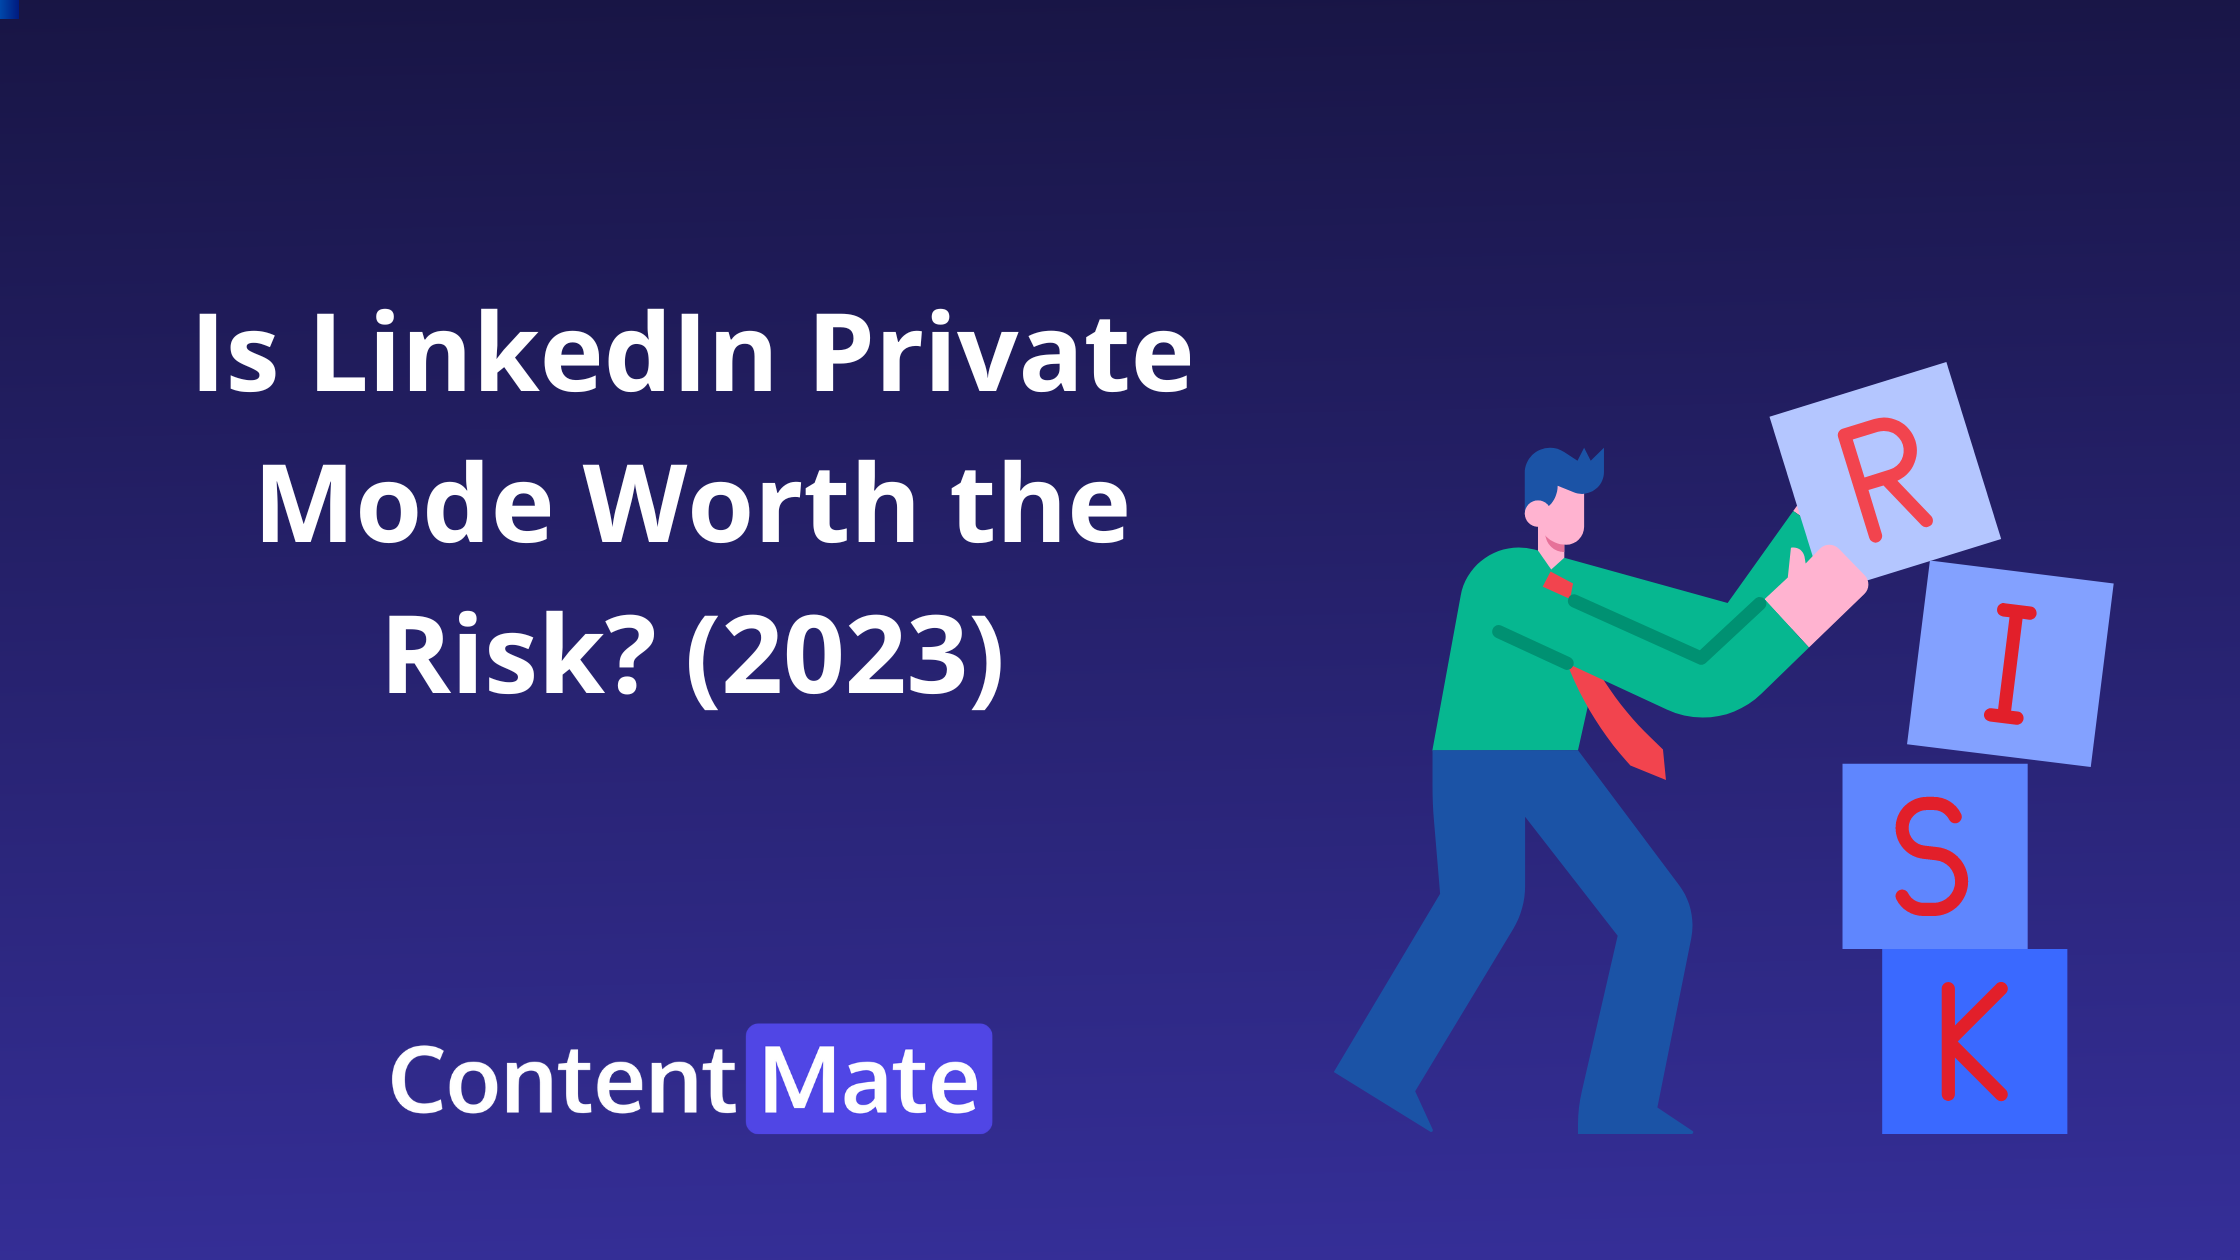 Is LinkedIn Private Mode Worth the Risk? (2023)